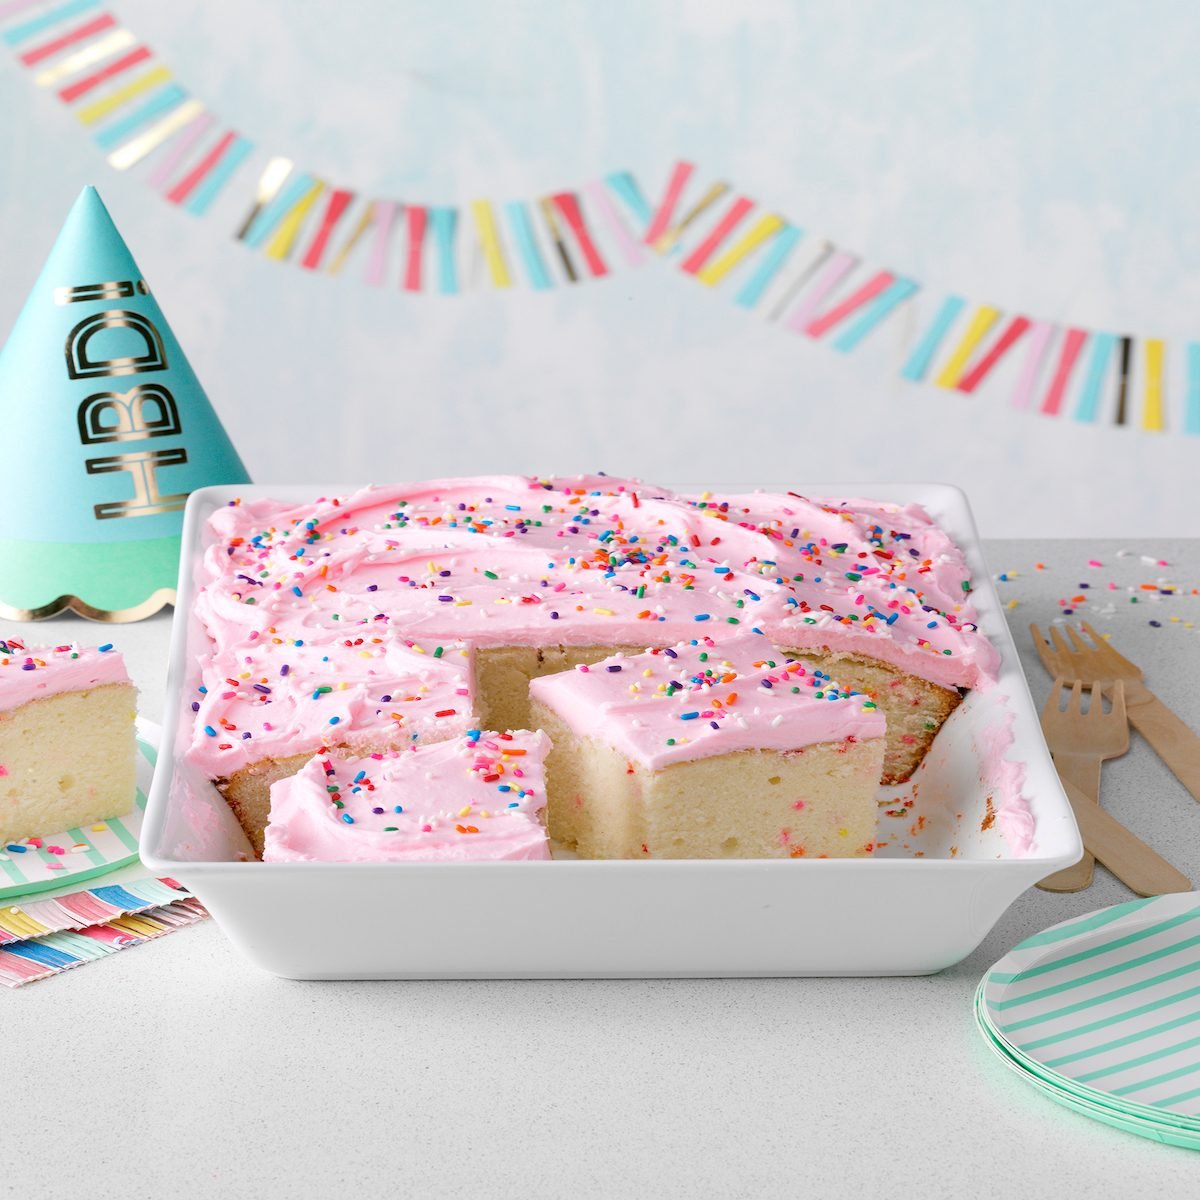 6 Easy Cake Designs That Aspiring Junior Bakers Will Love » Read Now!